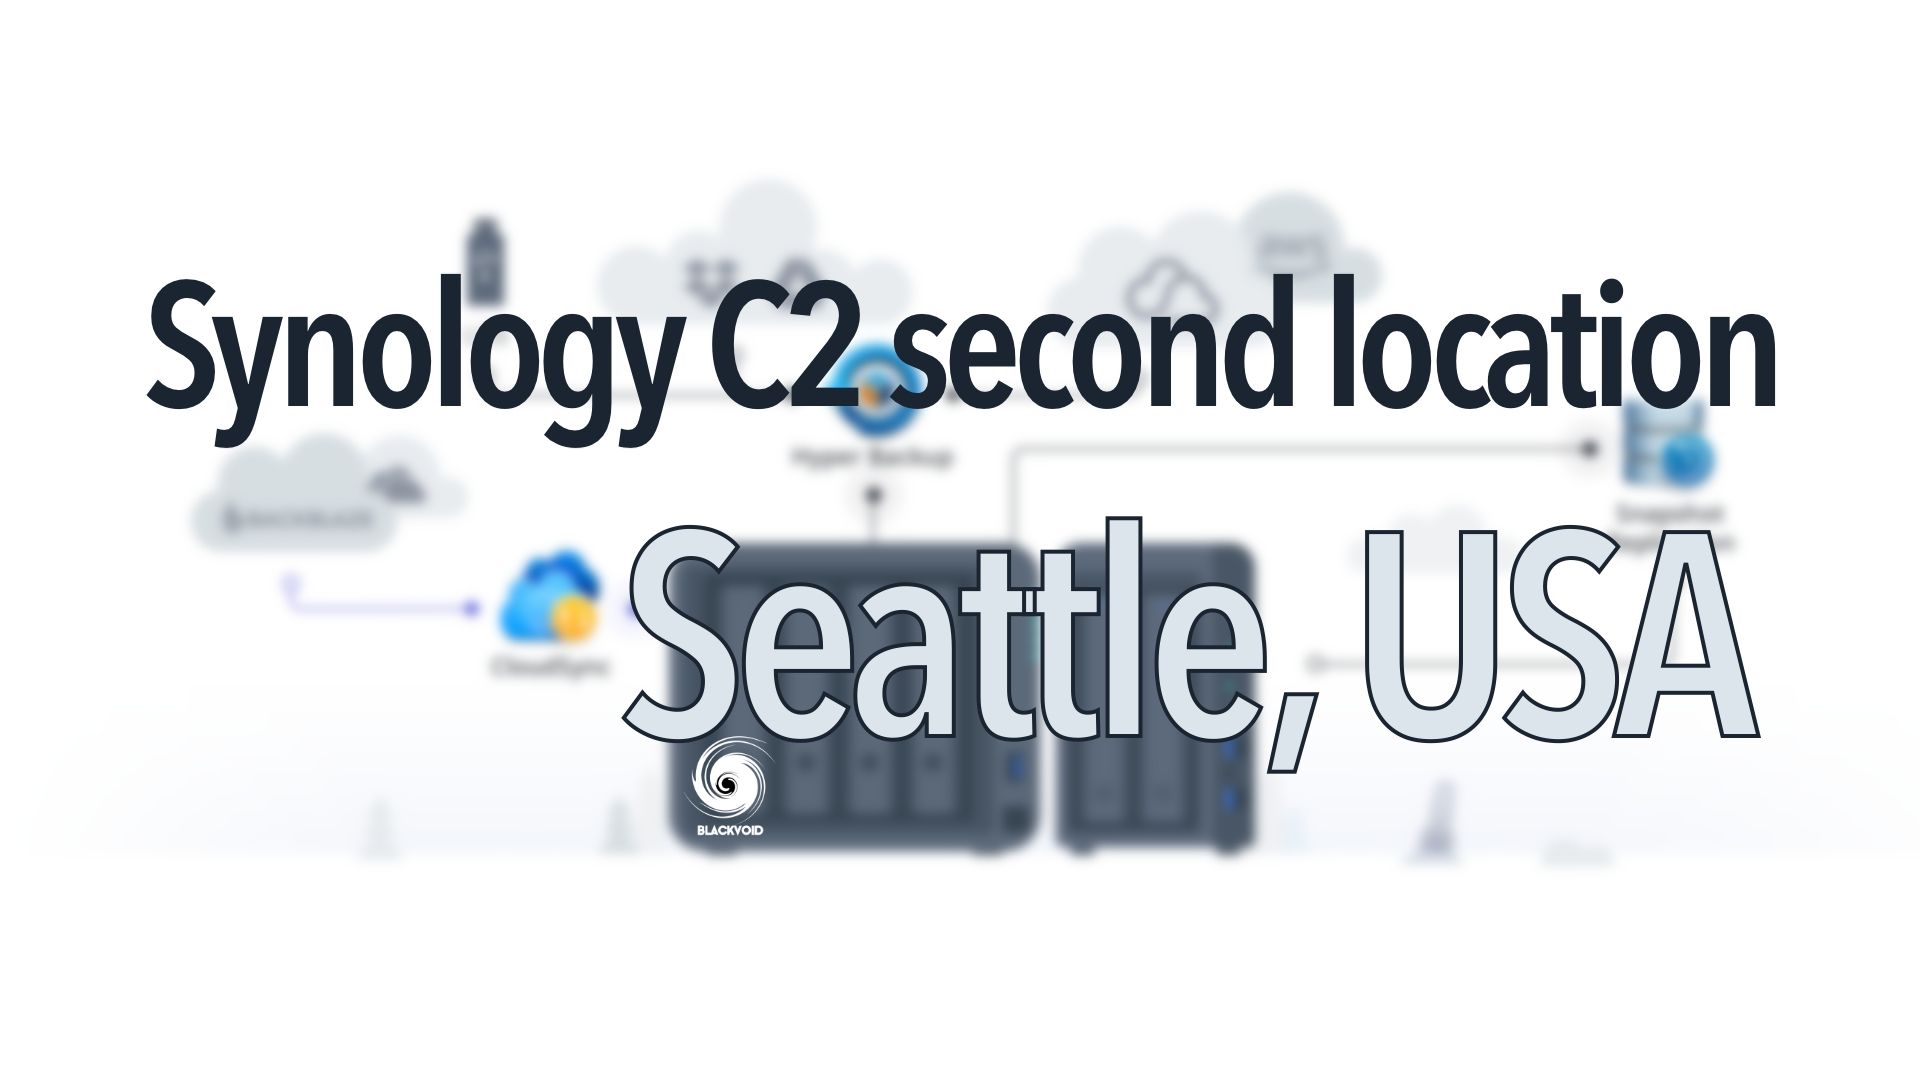 Second location for Synology C2 users, welcome Seattle!